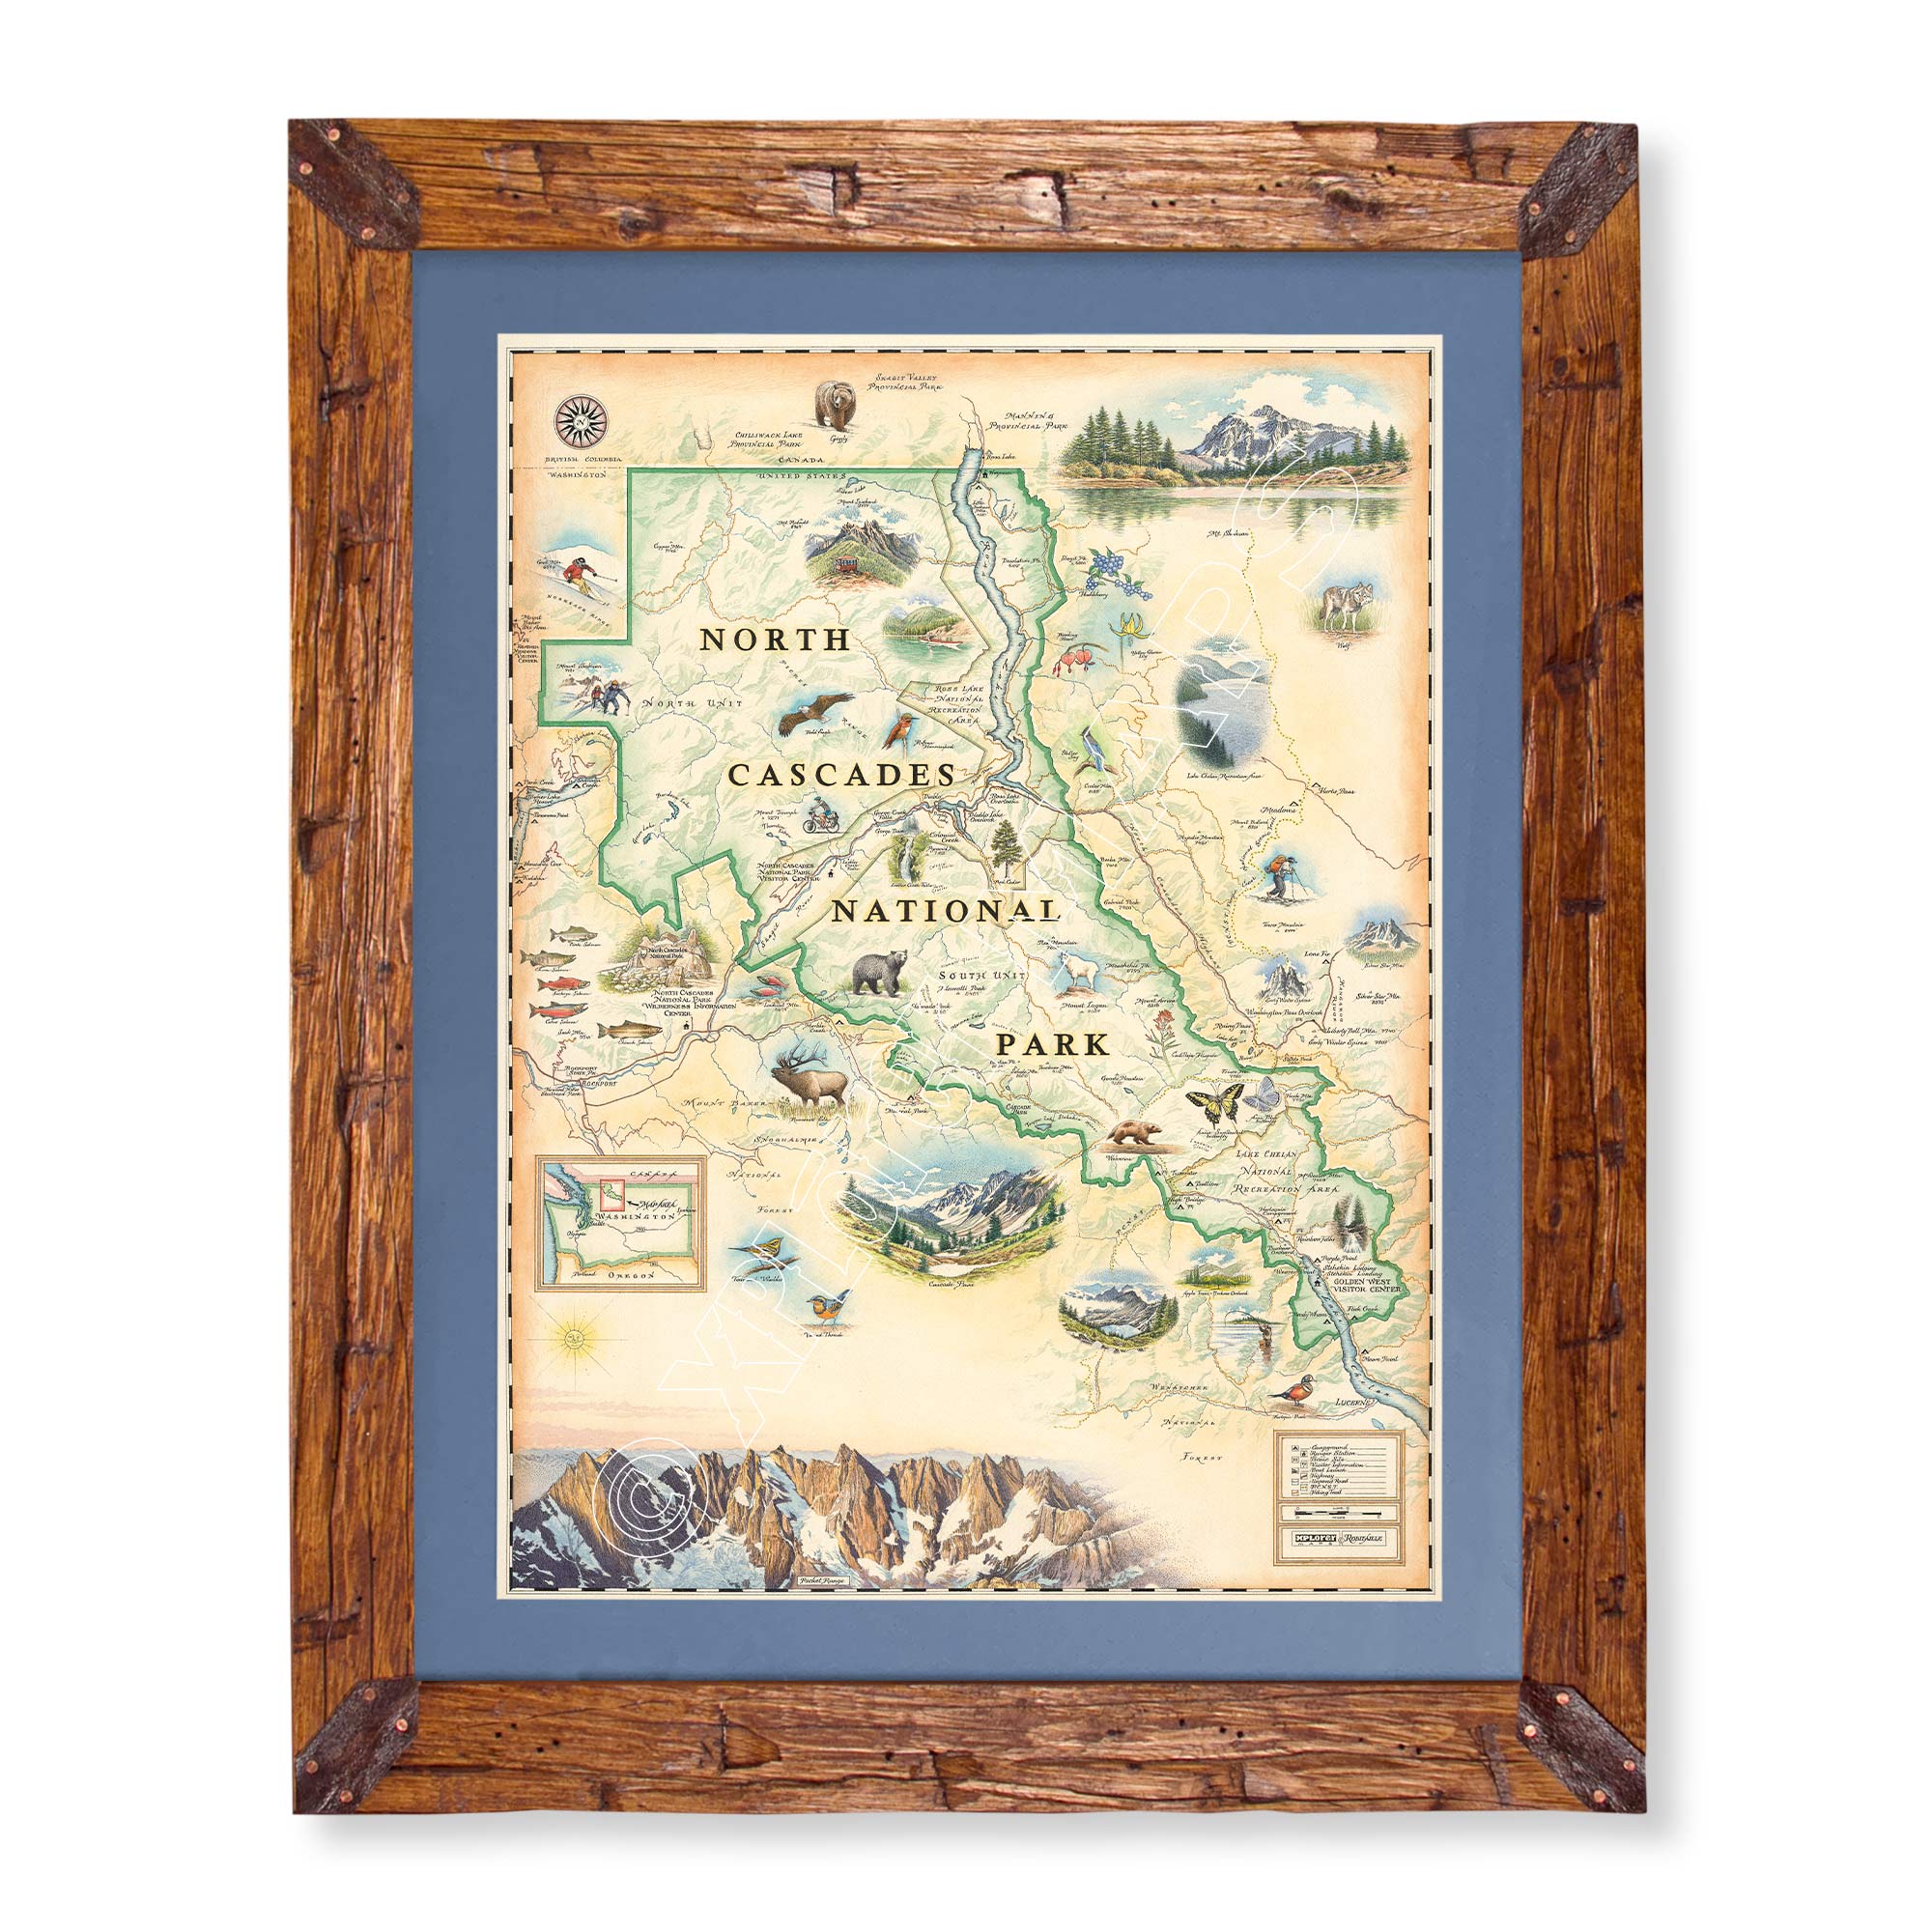 North Cascades National Park hand-drawn map in earth tones blues and greens. The map print is framed in Montana hand-scraped pine with a blue mat.